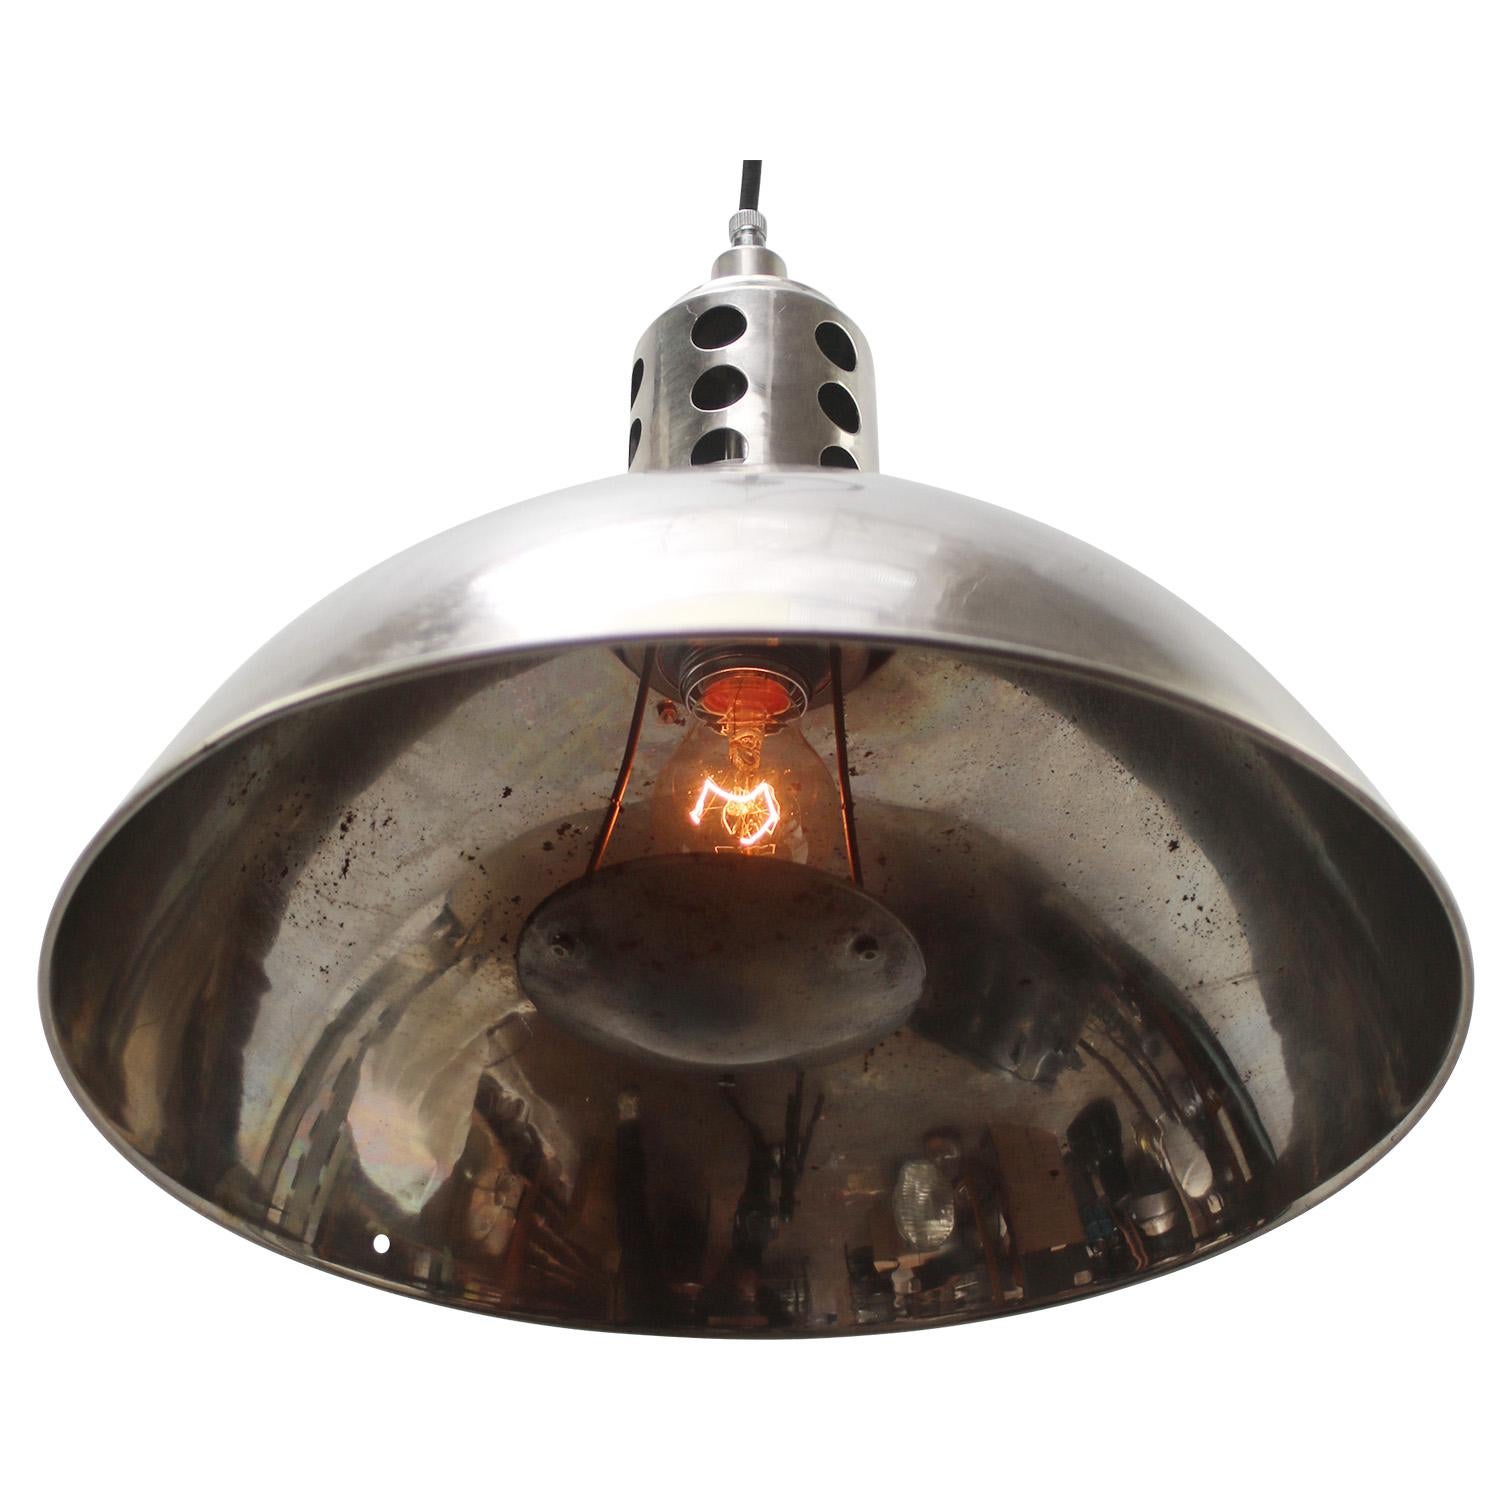 French vintage medical pendant lamp
Chrome / metal shade

Weight 2.00 kg / 4.4 lb

Priced per individual item. All lamps have been made suitable by international standards for incandescent light bulbs, energy-efficient and LED bulbs. E26/E27 bulb